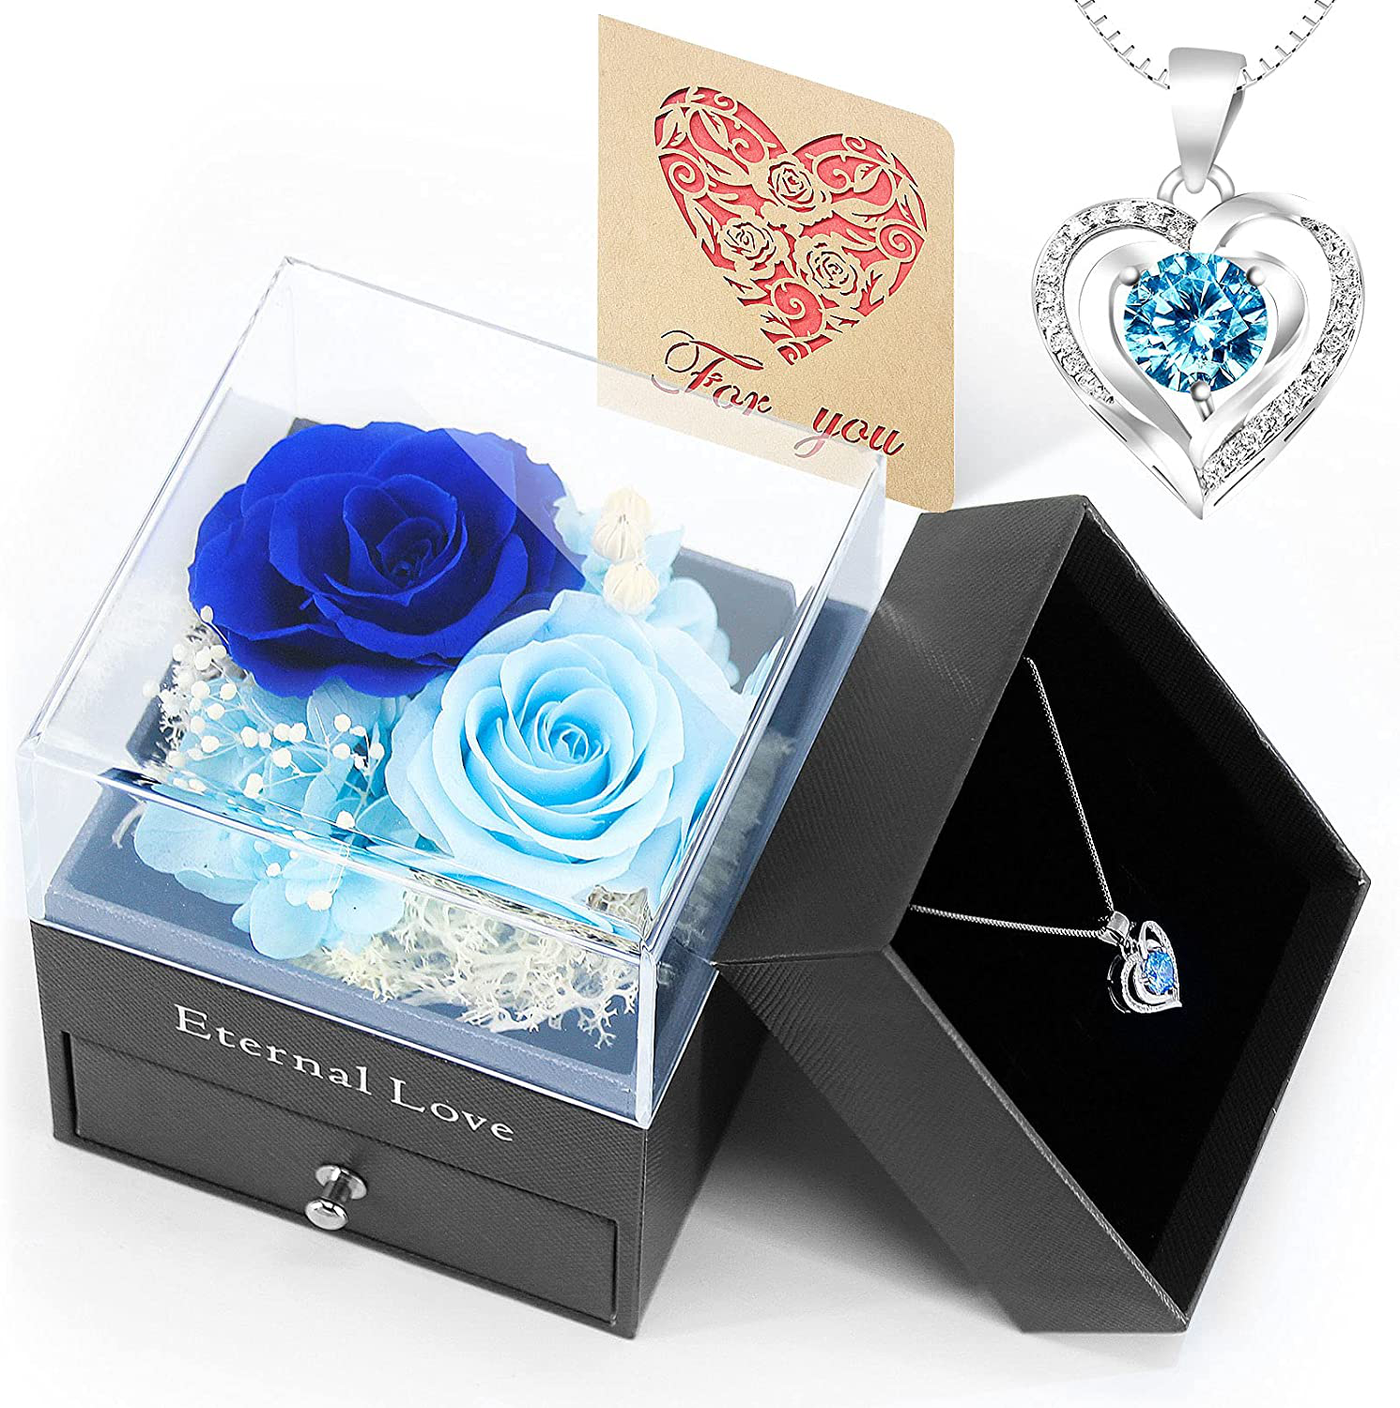 ATLYEROZ Eternal Rose with 14K Gold Plated Heart Necklace,Handmade Preserved Real Rose with Card Romantic Gift for Her,Girlfriend,Mother,Wife on Valentine's Day,Anniversary,Birthday,Xmas(Blue)